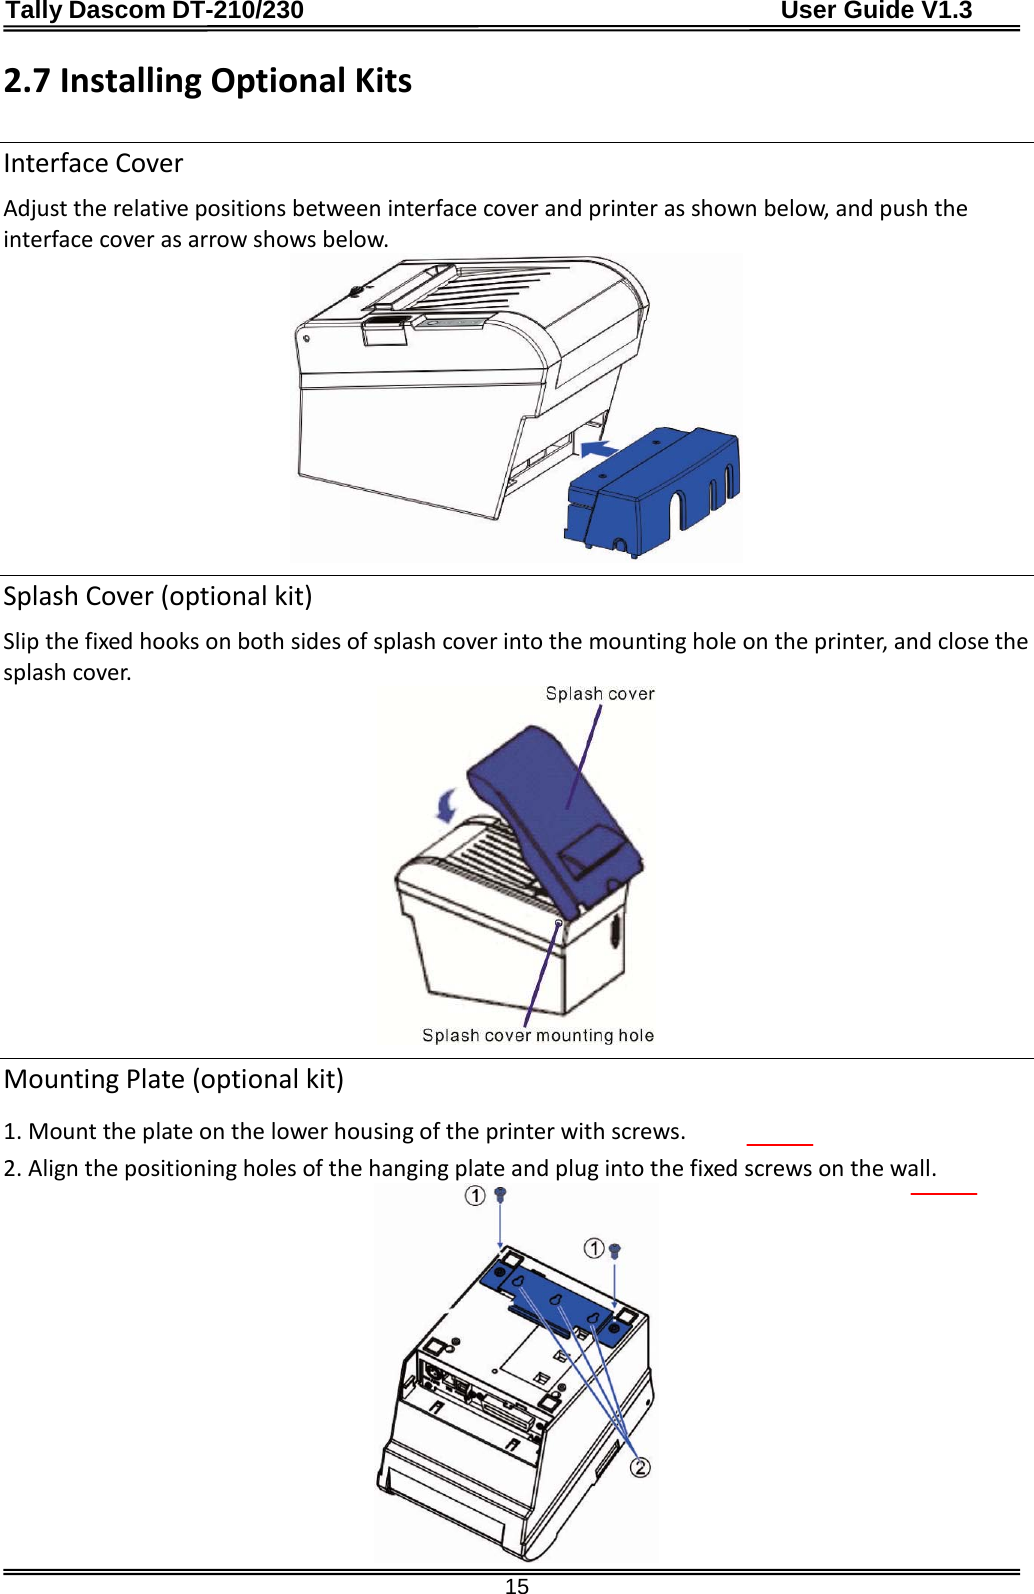 Tally Dascom DT-210/230                                      User Guide V1.3  15 2.7 Installing Optional Kits  Interface Cover Adjust the relative positions between interface cover and printer as shown below, and push the interface cover as arrow shows below.  Splash Cover (optional kit) Slip the fixed hooks on both sides of splash cover into the mounting hole on the printer, and close the splash cover.  Mounting Plate (optional kit) 1. Mount the plate on the lower housing of the printer with screws. 2. Align the positioning holes of the hanging plate and plug into the fixed screws on the wall.  